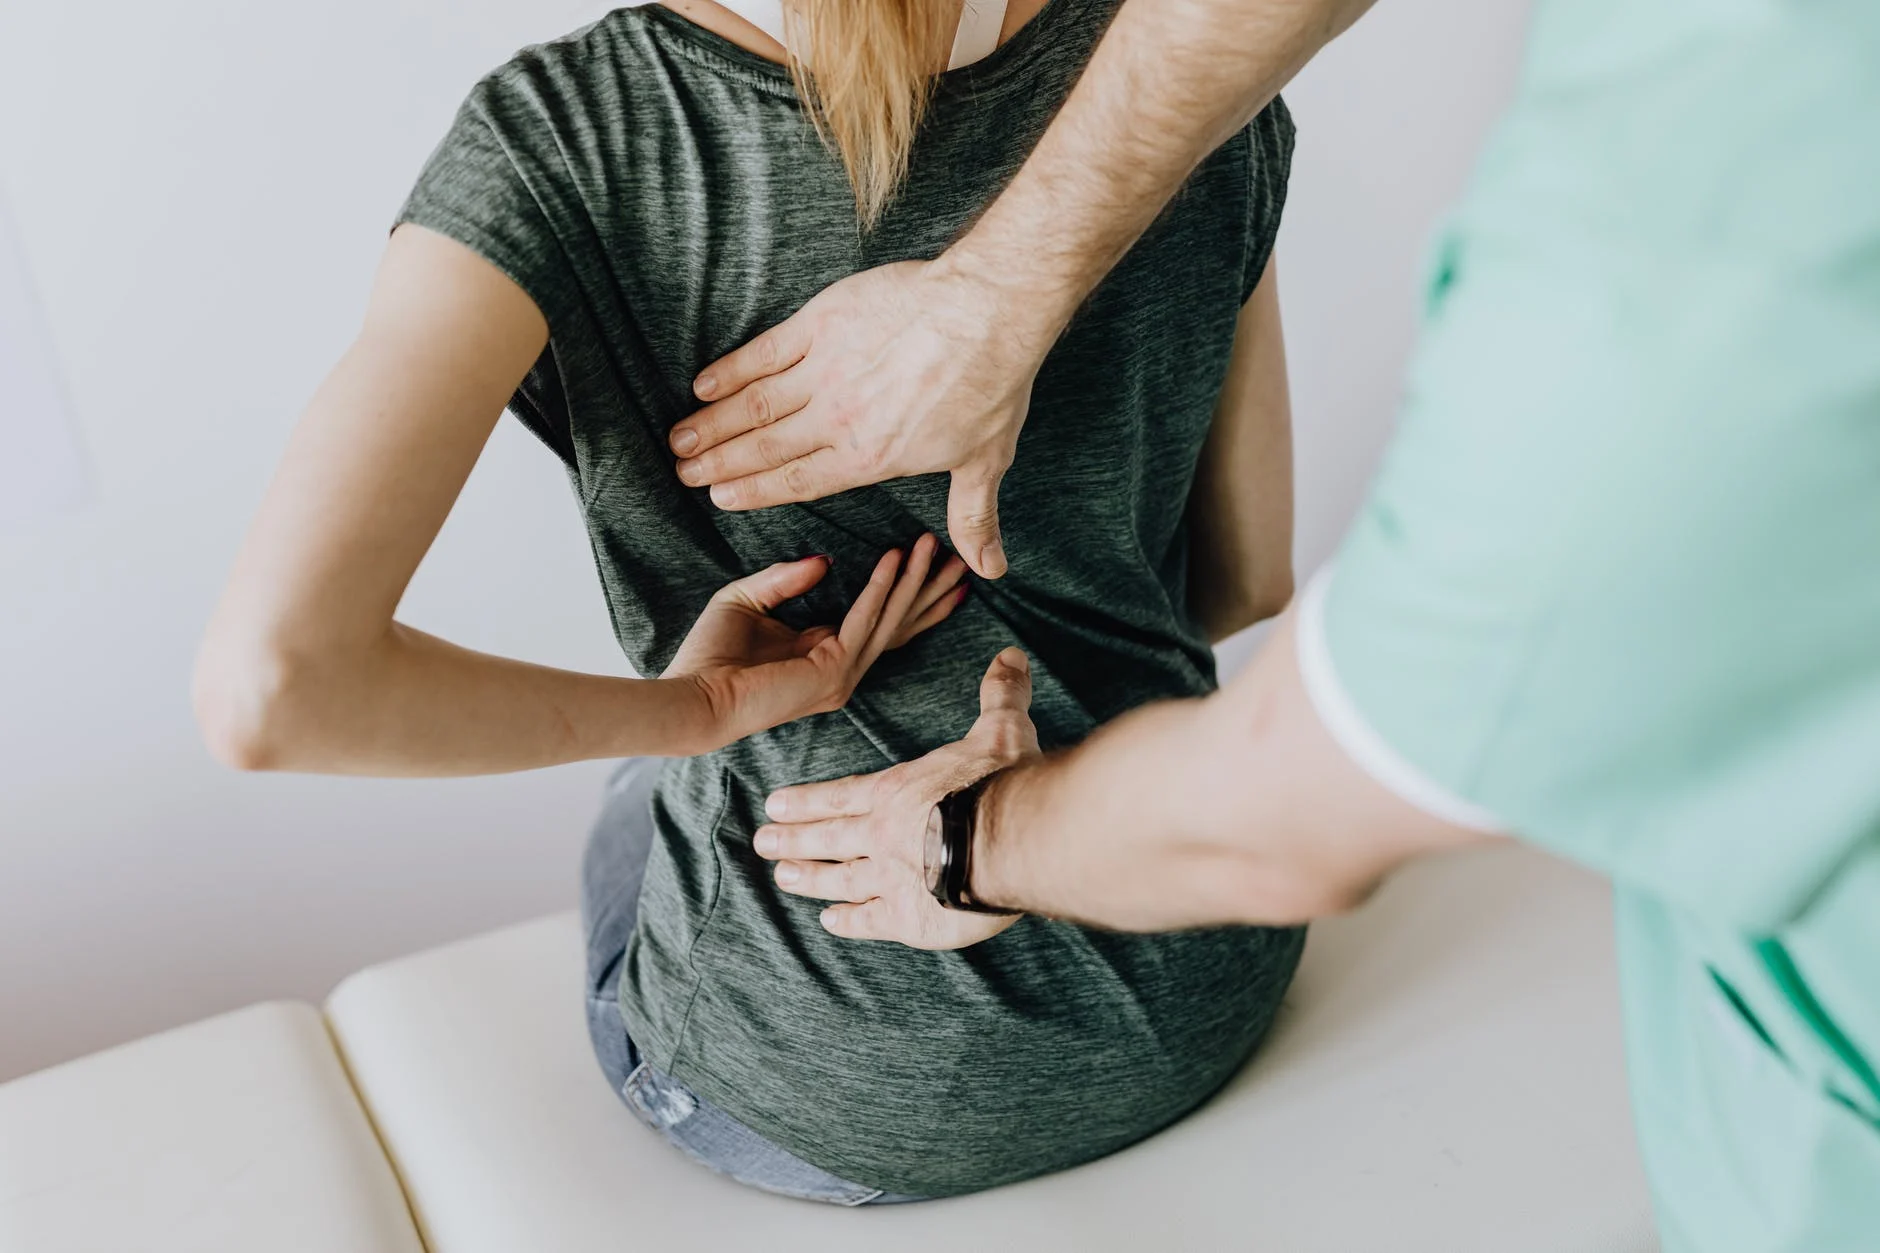 4 Easy ways to quickly relieve back pain